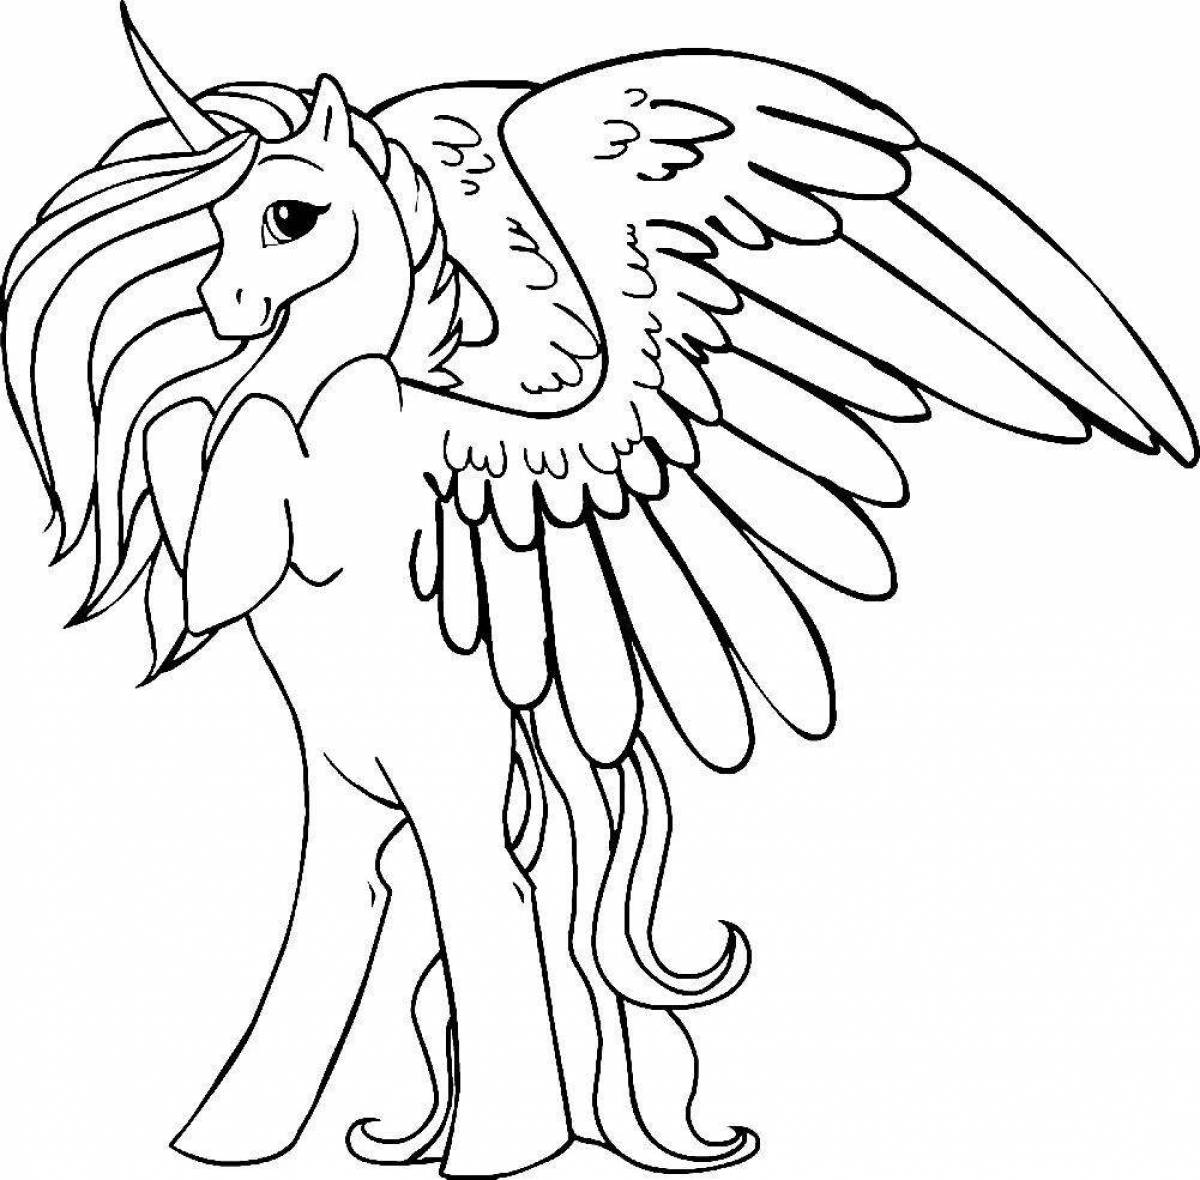 Magic unicorns glowing coloring pages